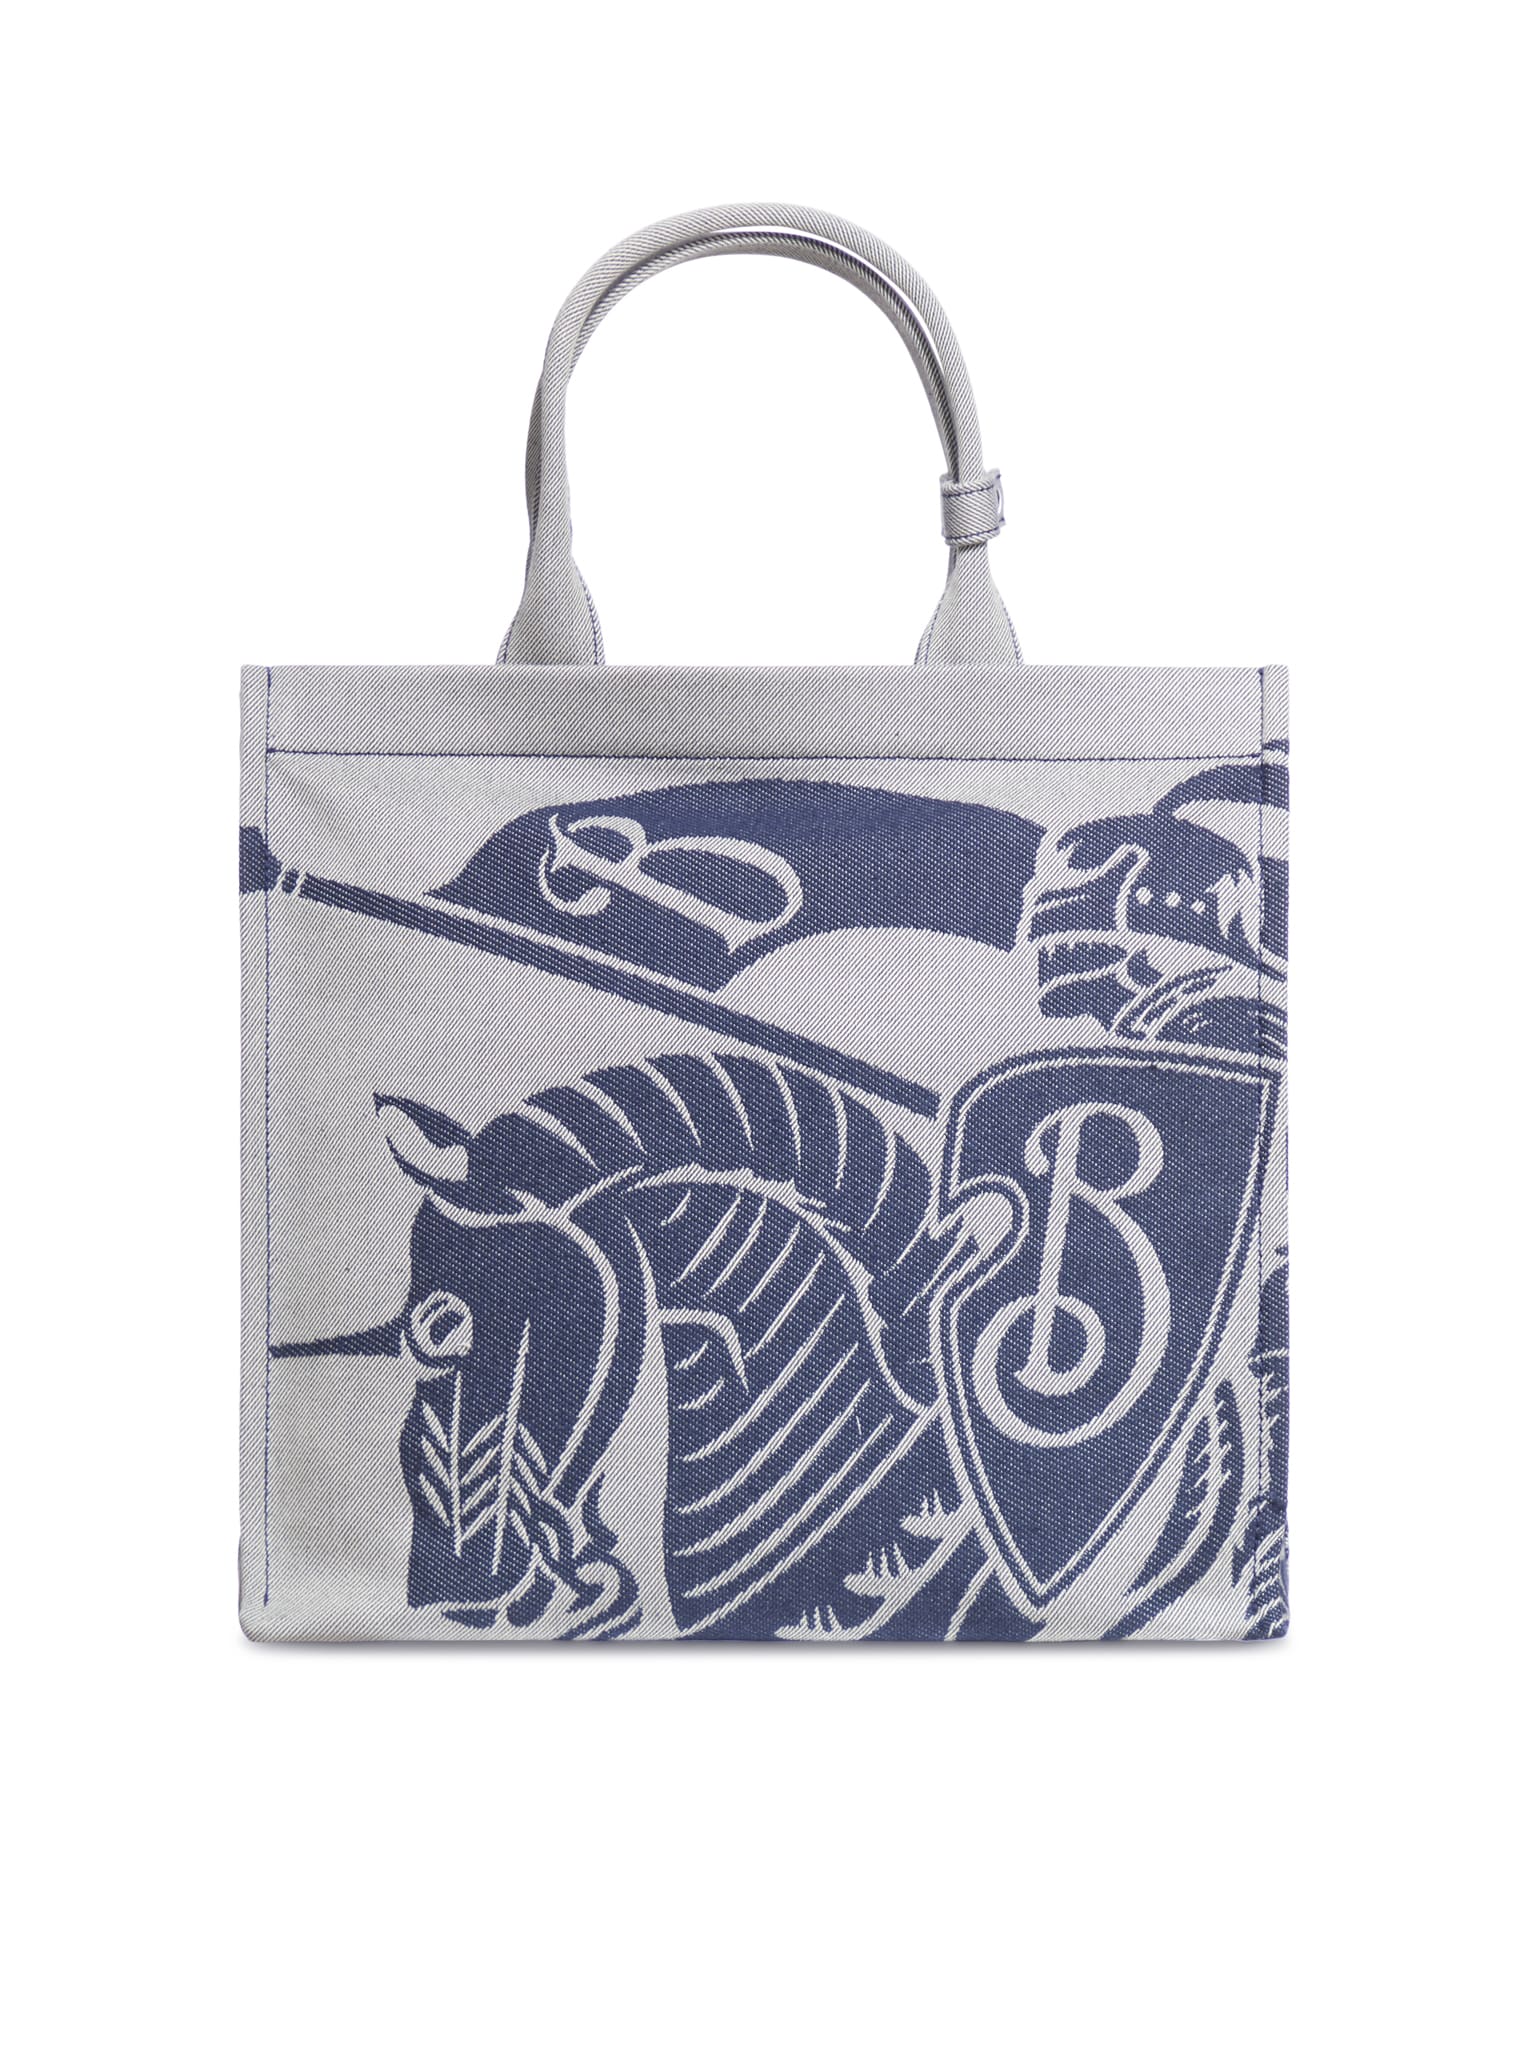 Embroidered Canvas Shopping Bag